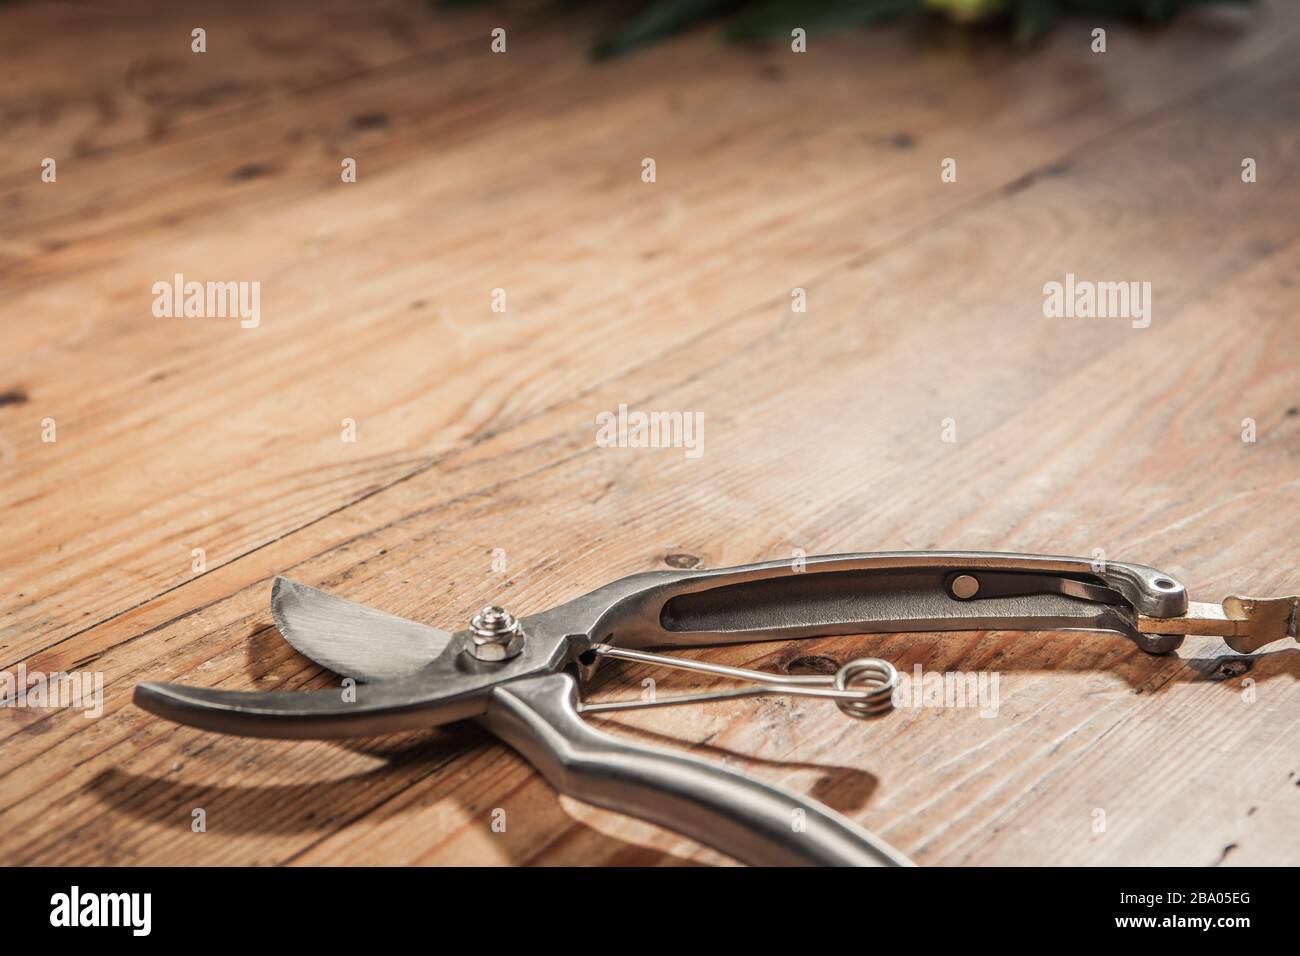 secateurs pruning shears on wooden table top Stock Photo